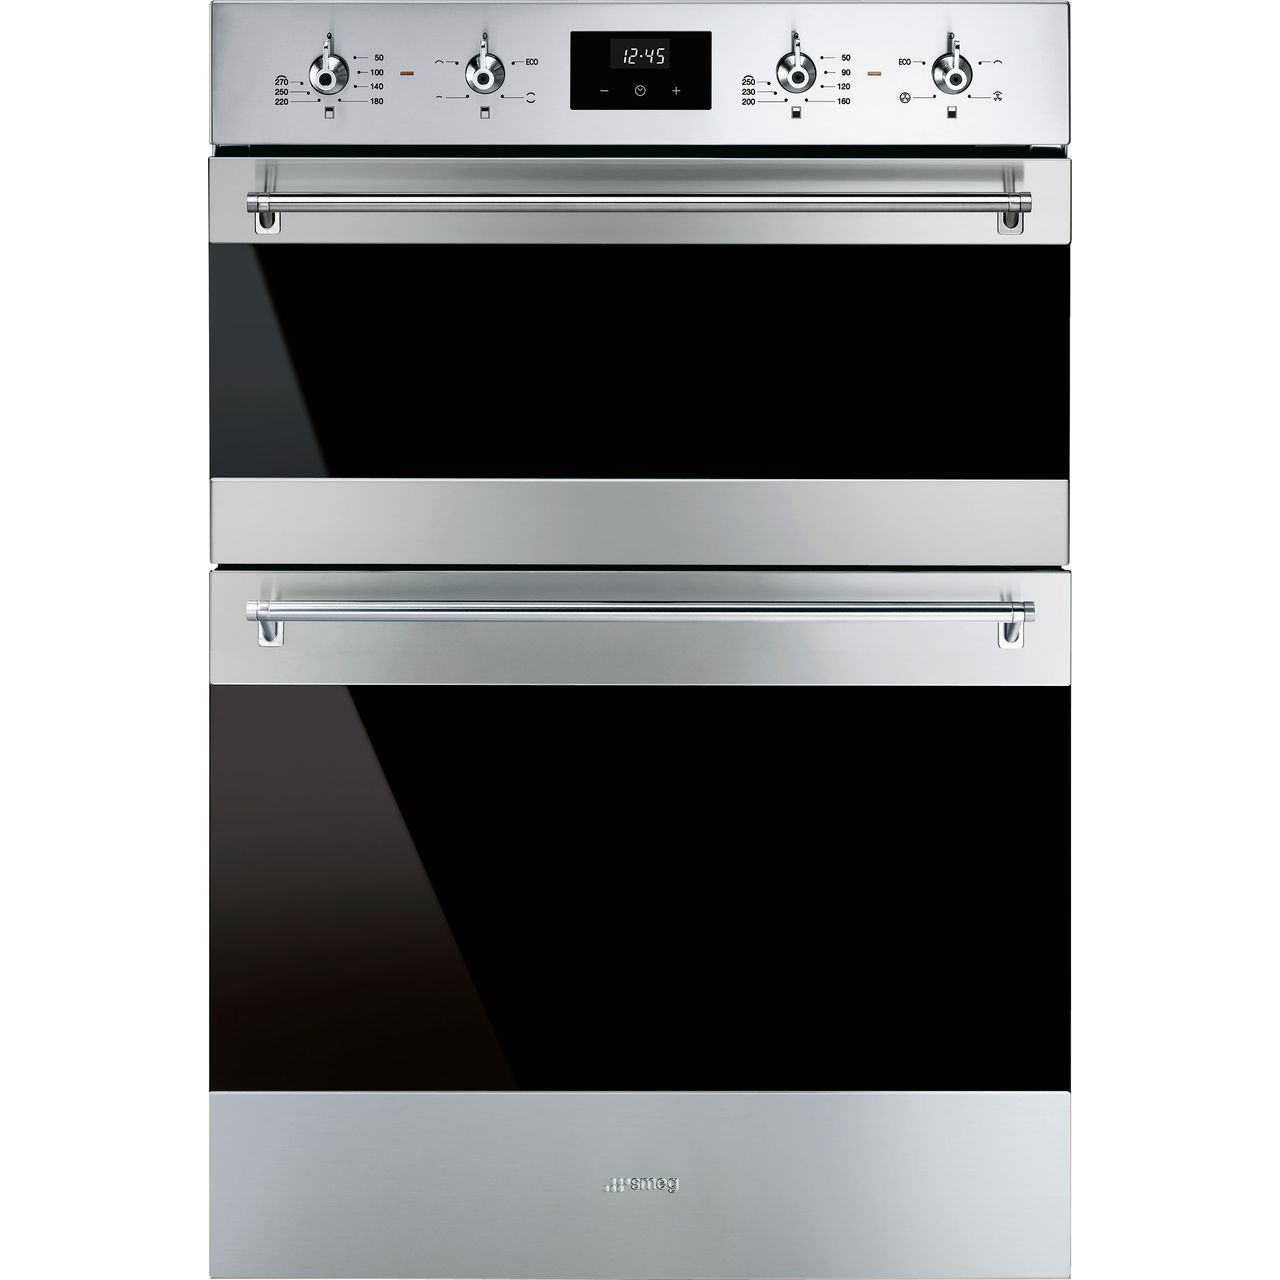 Smeg Classic DOSF6300X Built In Double Oven Review